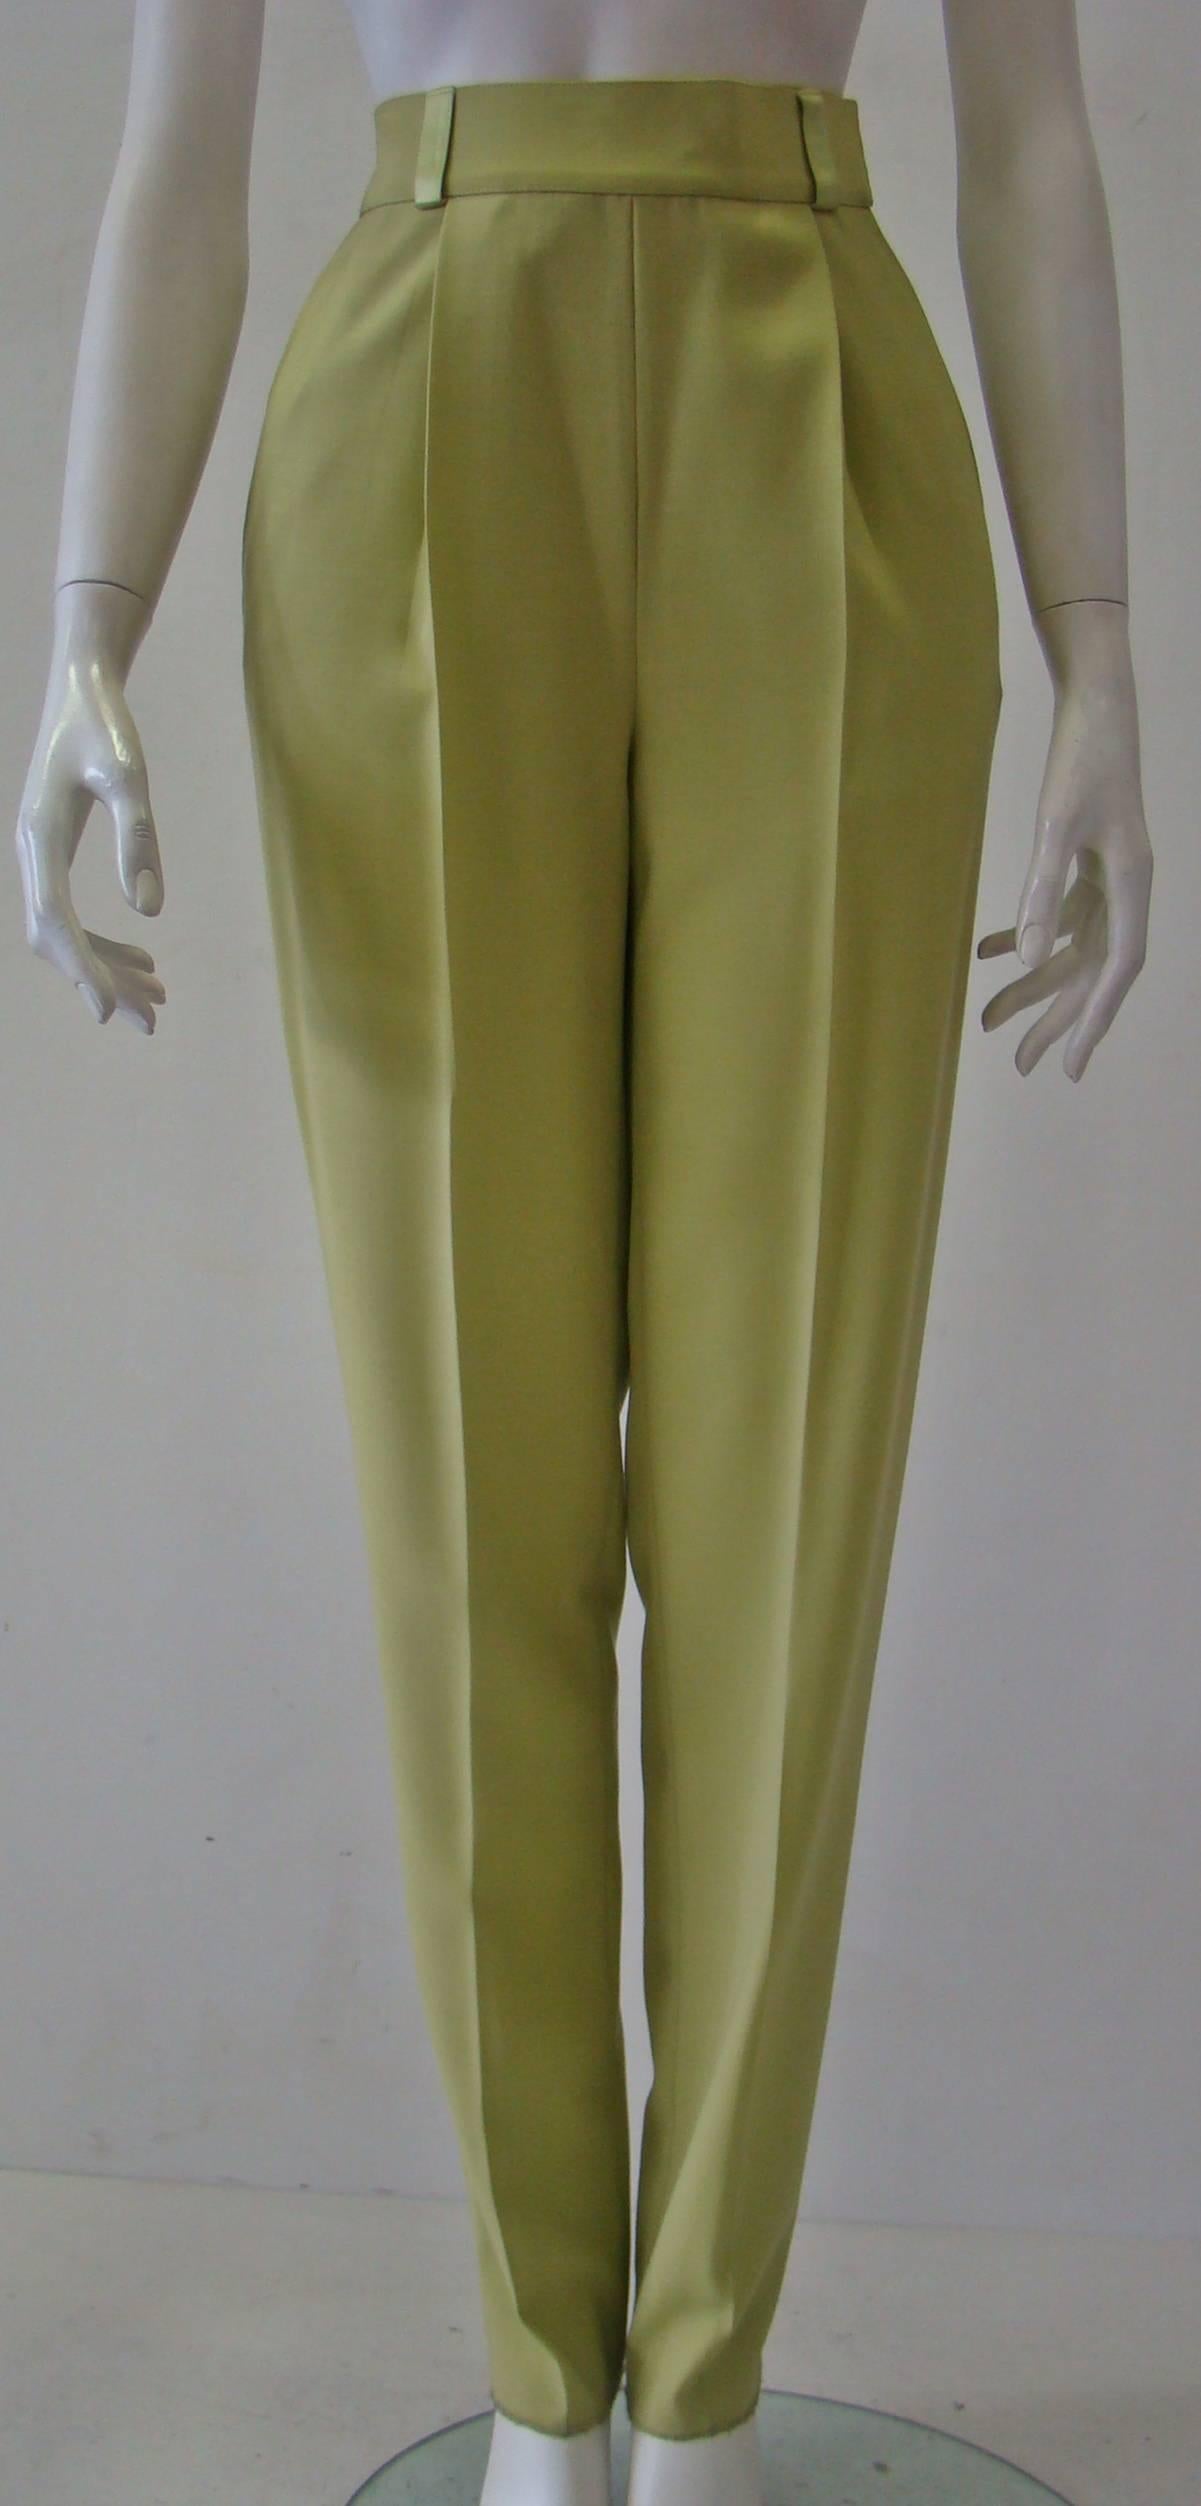 Gianni Versace Couture High Waisted Pants. An Extraordinary Combination Of Wool And Silk With Velvet Lines at The Sides.